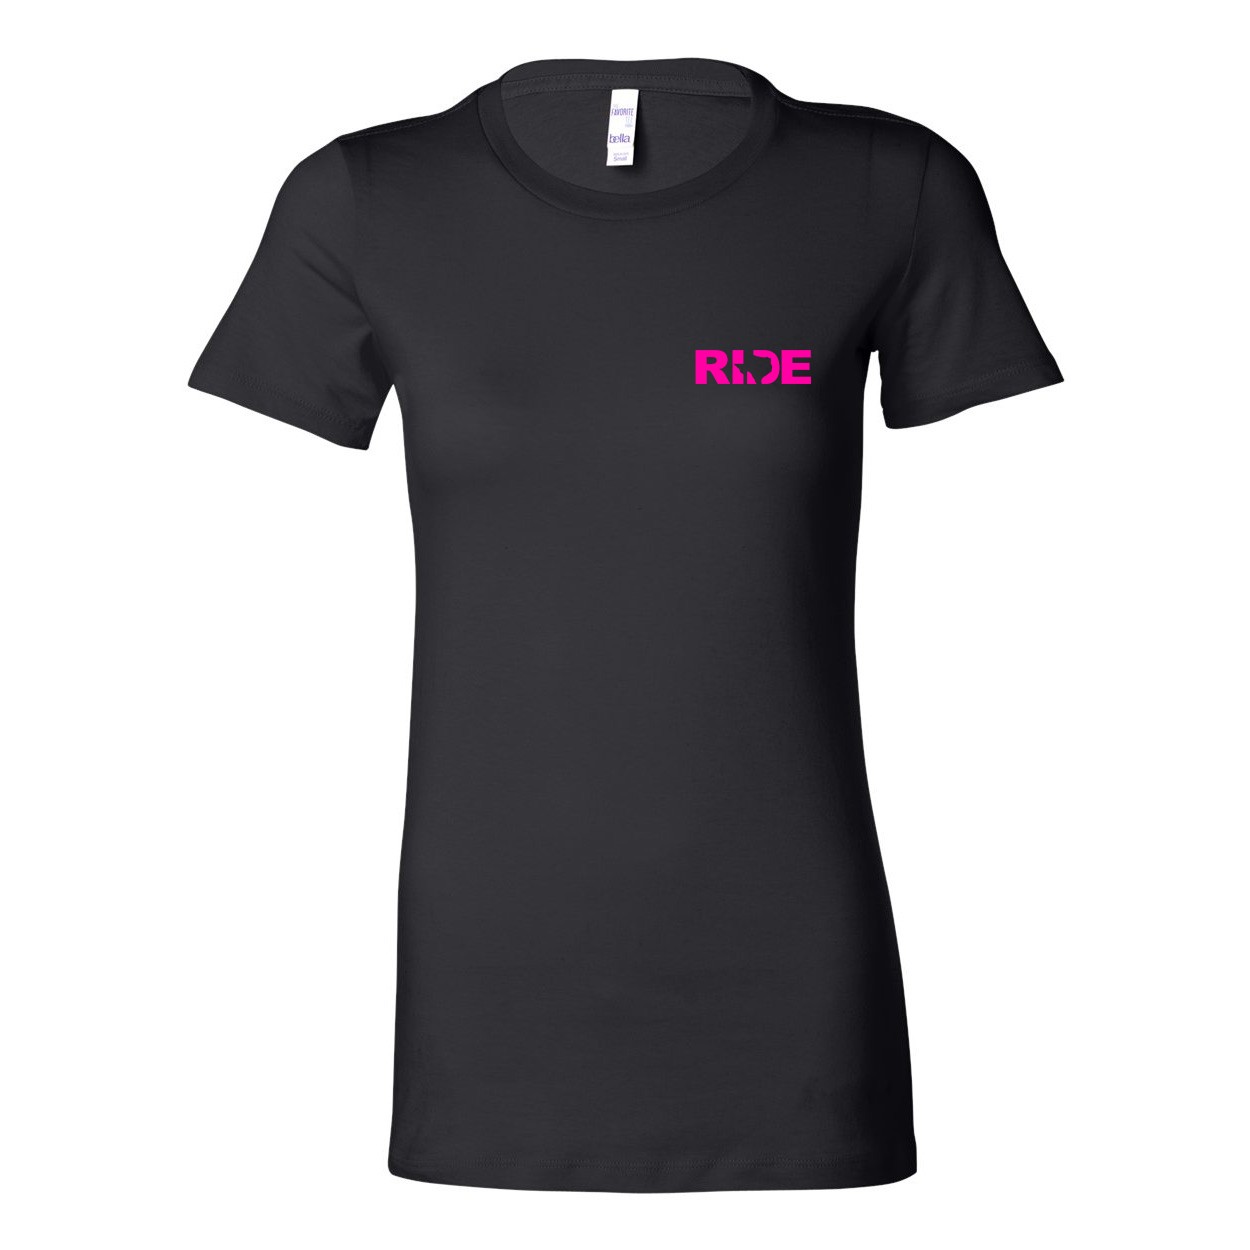 Ride Texas Women's Night Out Fitted Tri-Blend T-Shirt Black (Pink Logo)